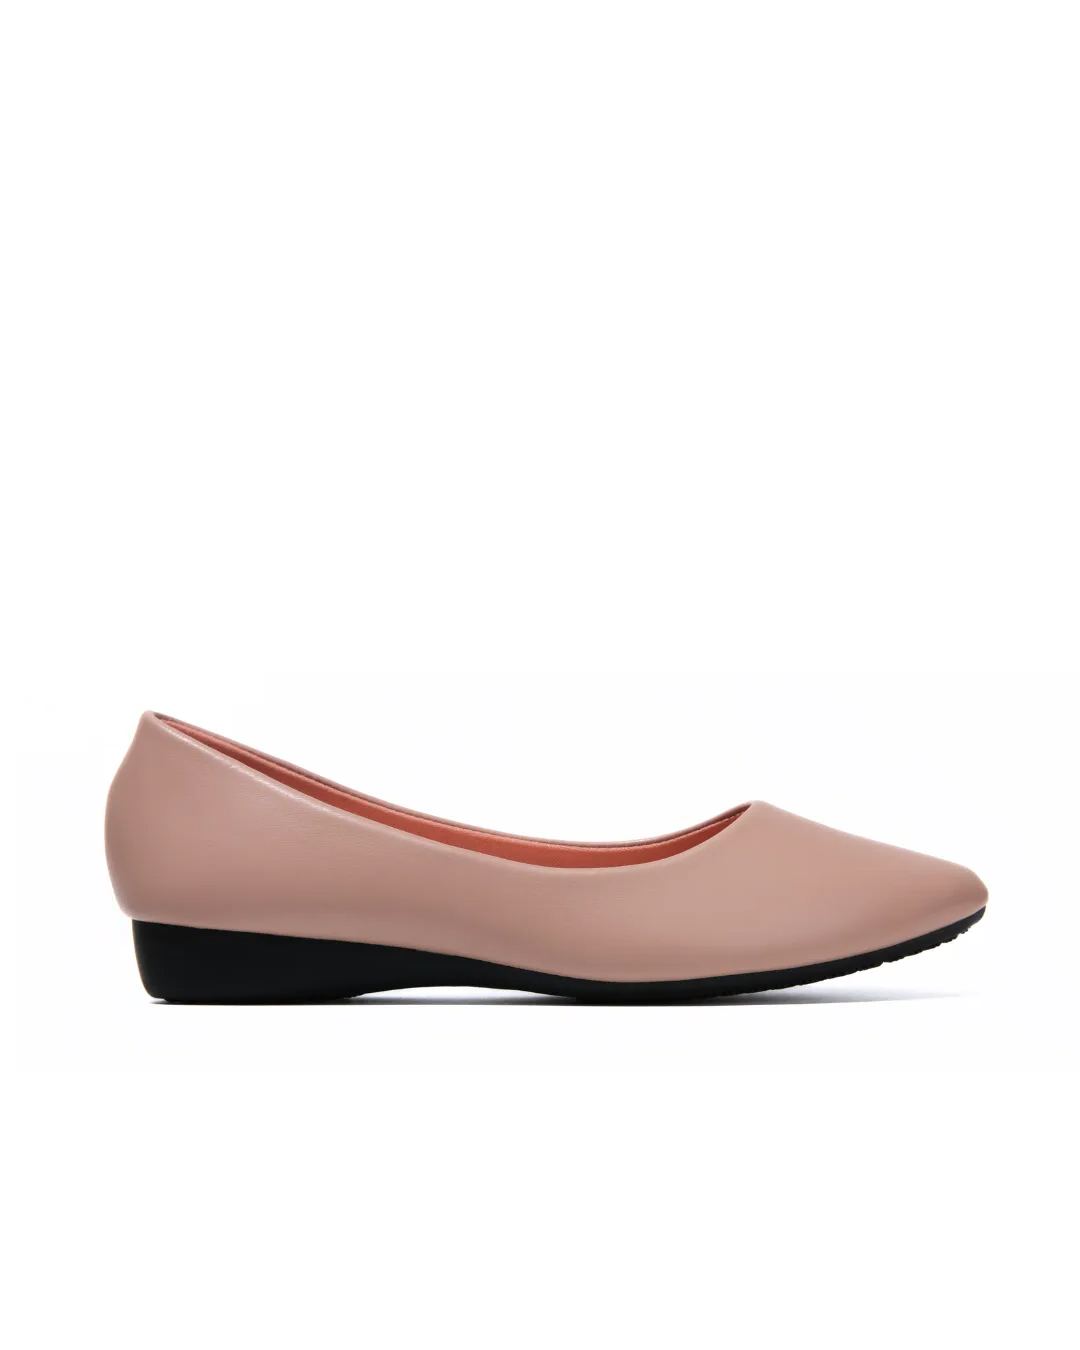 【NEW】Lyden Air-Cushioned Series 2cm Low Heels - Pink